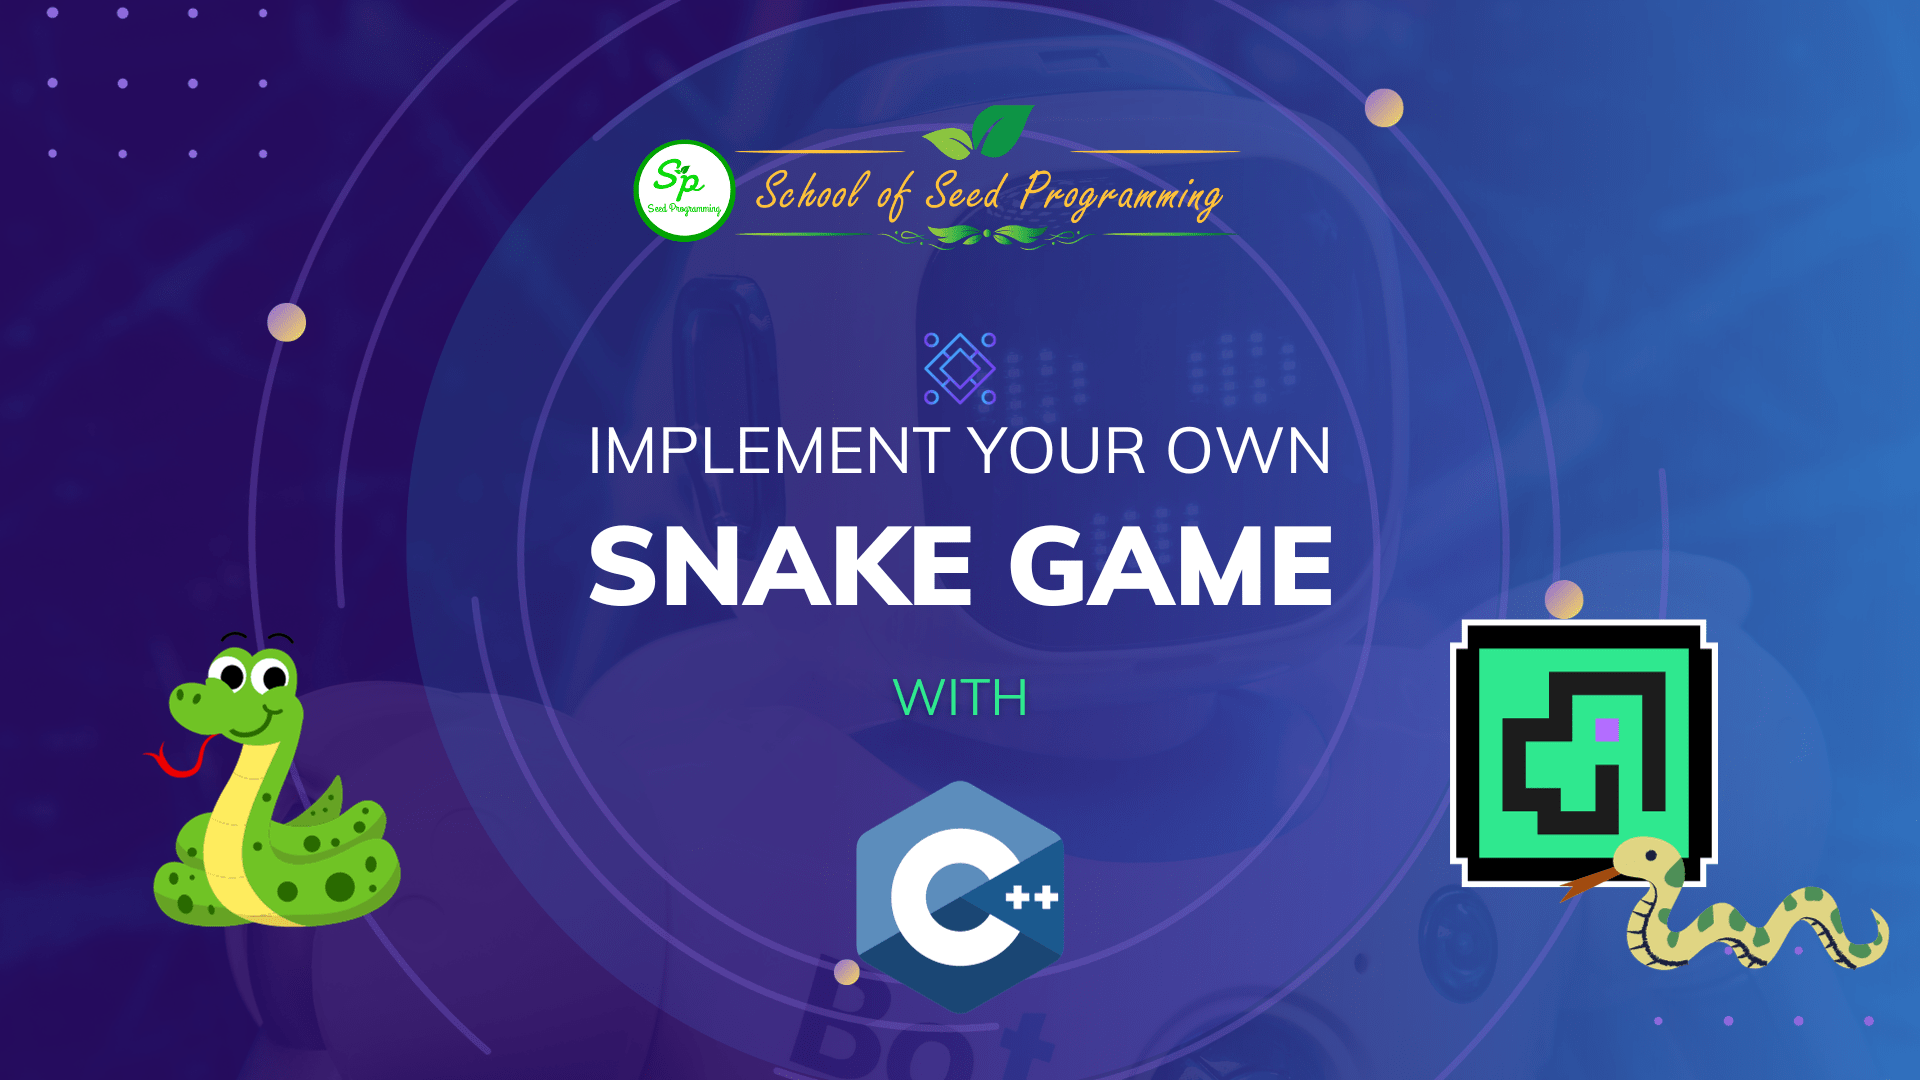 Snake Game with C++